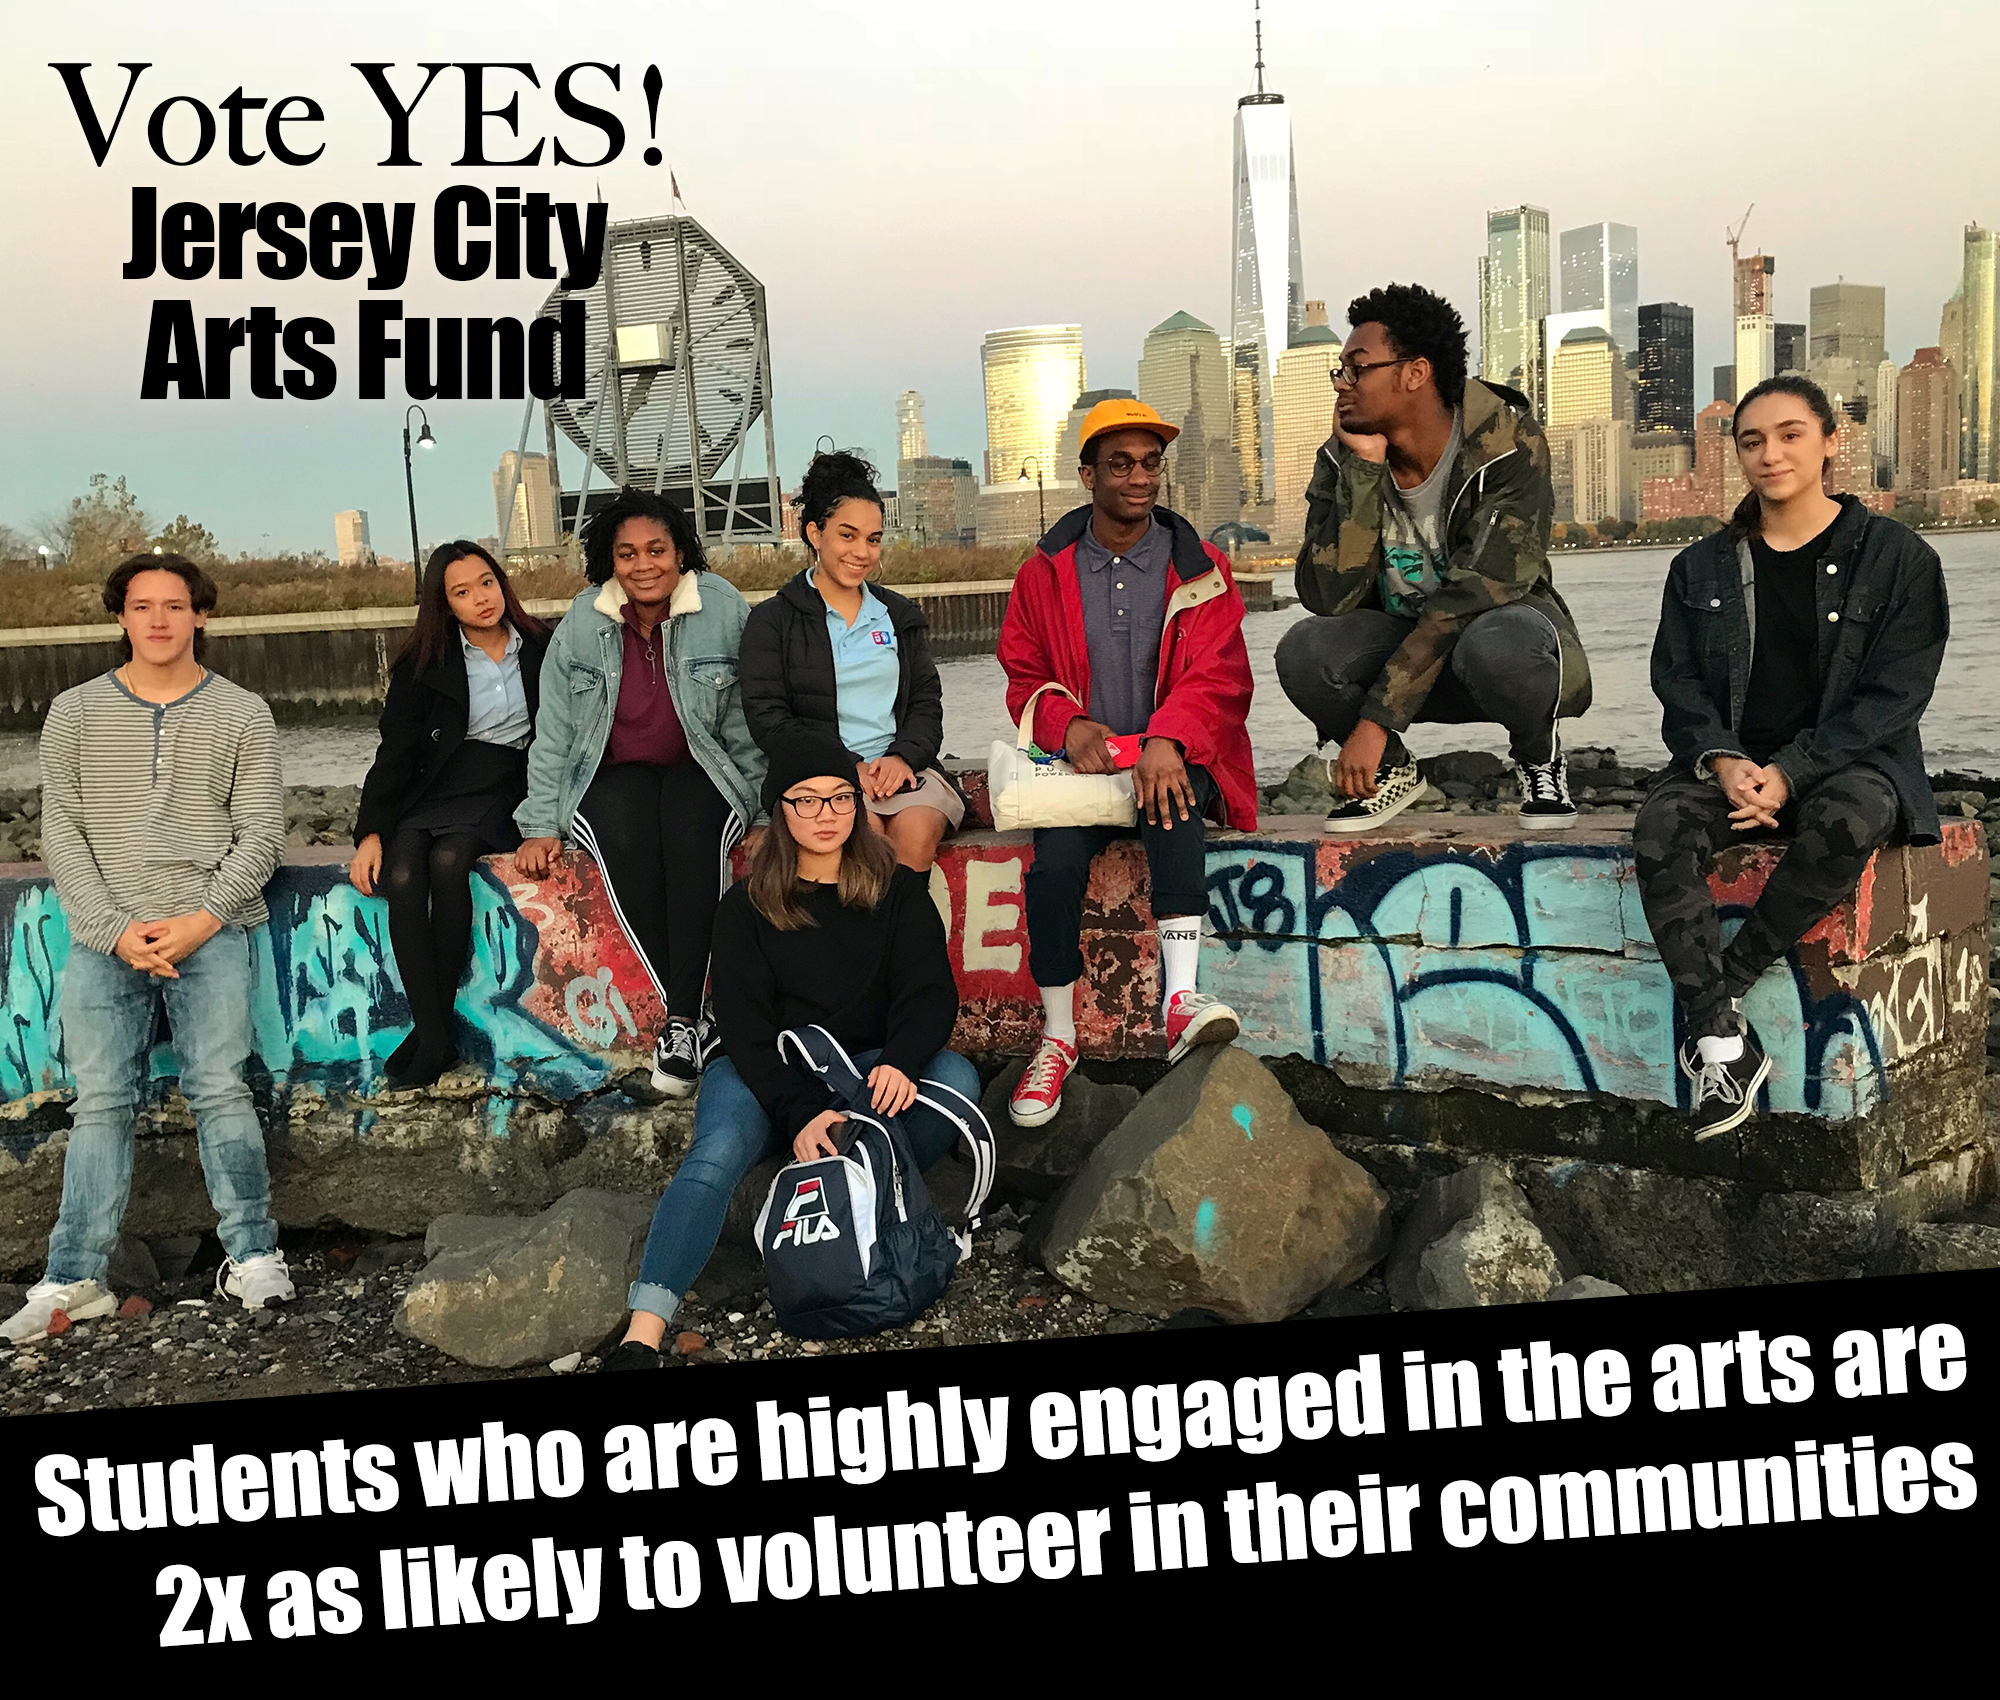 A group of eight ethnically diverse high school-aged students are smiling at the camera with a city skyline behind them. The words "Vote yes! Jersey City Arts Fund" and "Students who are highly engaged in the arts are 2x as likely to volunteer in their communities" are seen on the image in white letting.